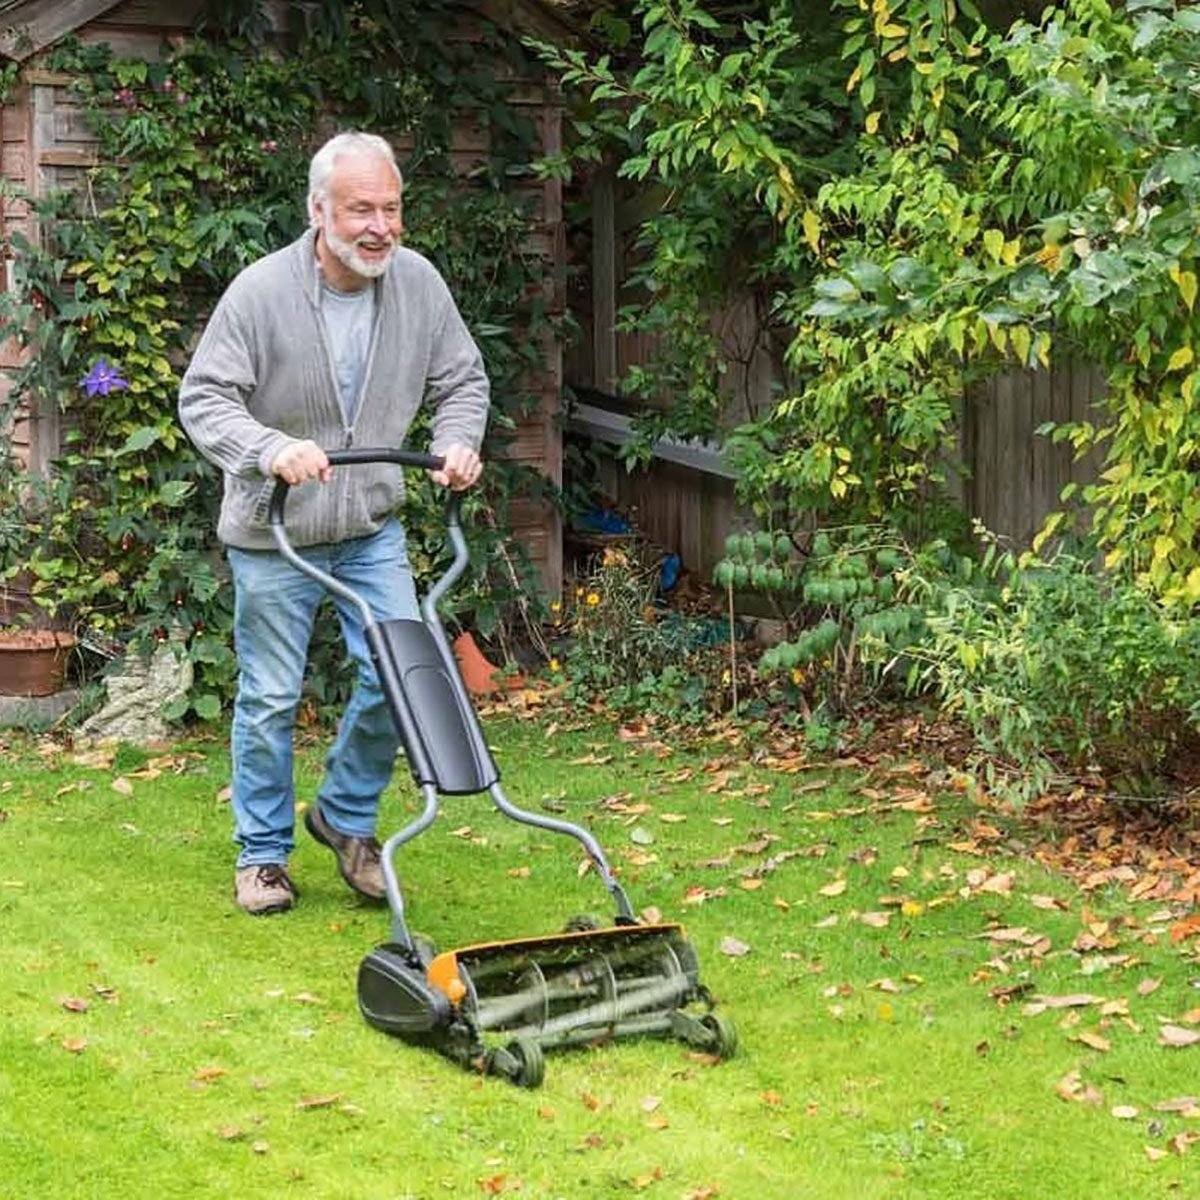 7 Ways to Prepare Your Lawn for the Fall